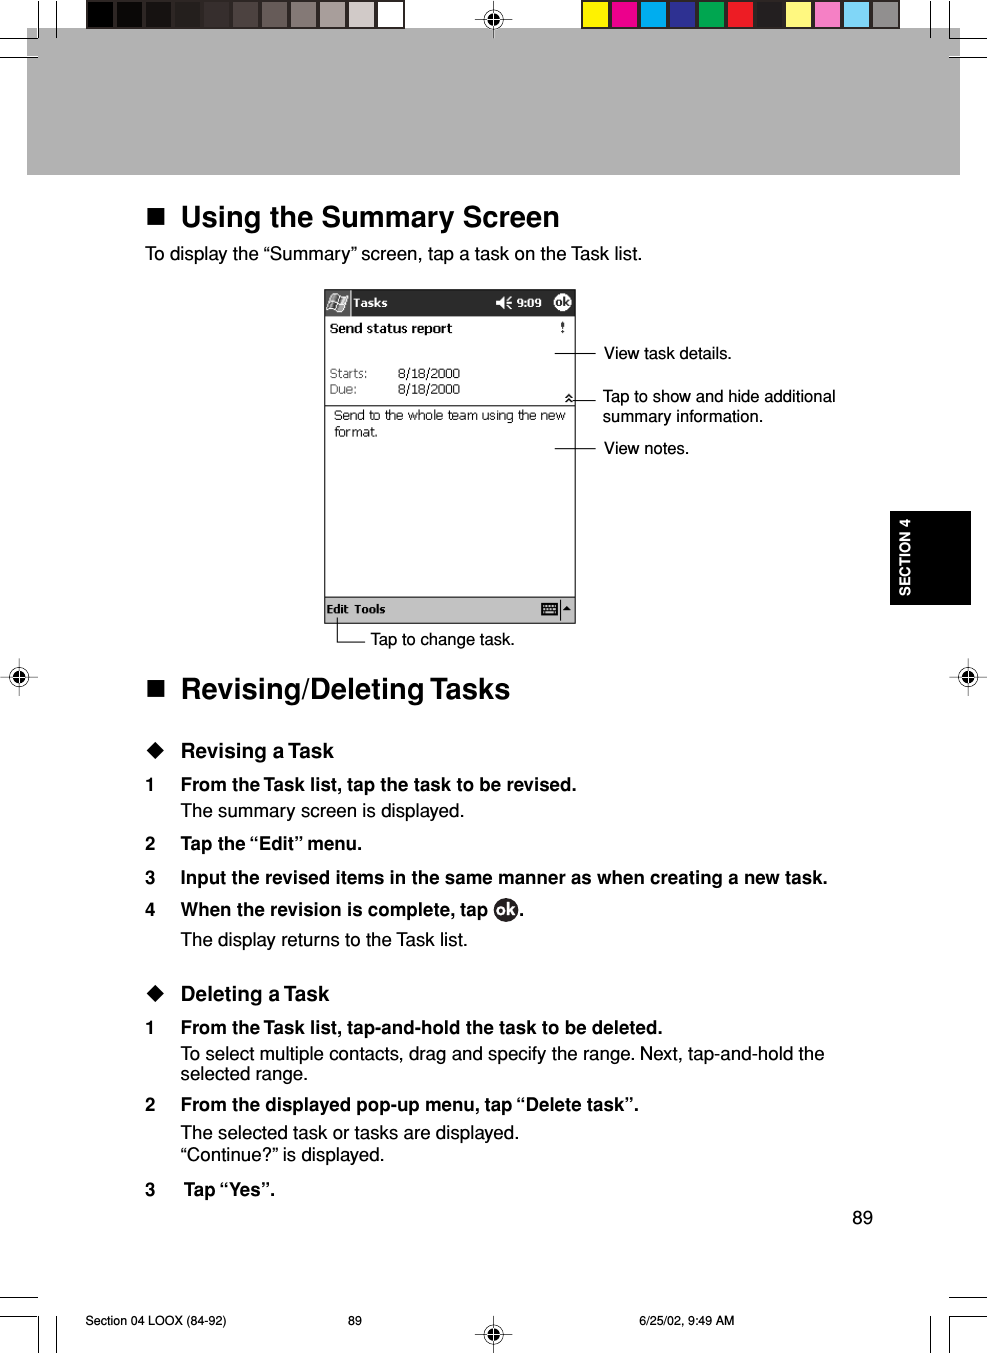 89SECTION 4Using the Summary ScreenTo display the “Summary” screen, tap a task on the Task list.Revising/Deleting TasksRevising a Task1 From the Task list, tap the task to be revised.The summary screen is displayed.2 Tap the “Edit” menu.3 Input the revised items in the same manner as when creating a new task.4 When the revision is complete, tap  .The display returns to the Task list.Deleting a Task1 From the Task list, tap-and-hold the task to be deleted.To select multiple contacts, drag and specify the range. Next, tap-and-hold theselected range.2 From the displayed pop-up menu, tap “Delete task”.The selected task or tasks are displayed.“Continue?” is displayed.3  Tap “Yes”.View task details.Tap to show and hide additionalsummary information.View notes.Tap to change task.Section 04 LOOX (84-92) 6/25/02, 9:49 AM89